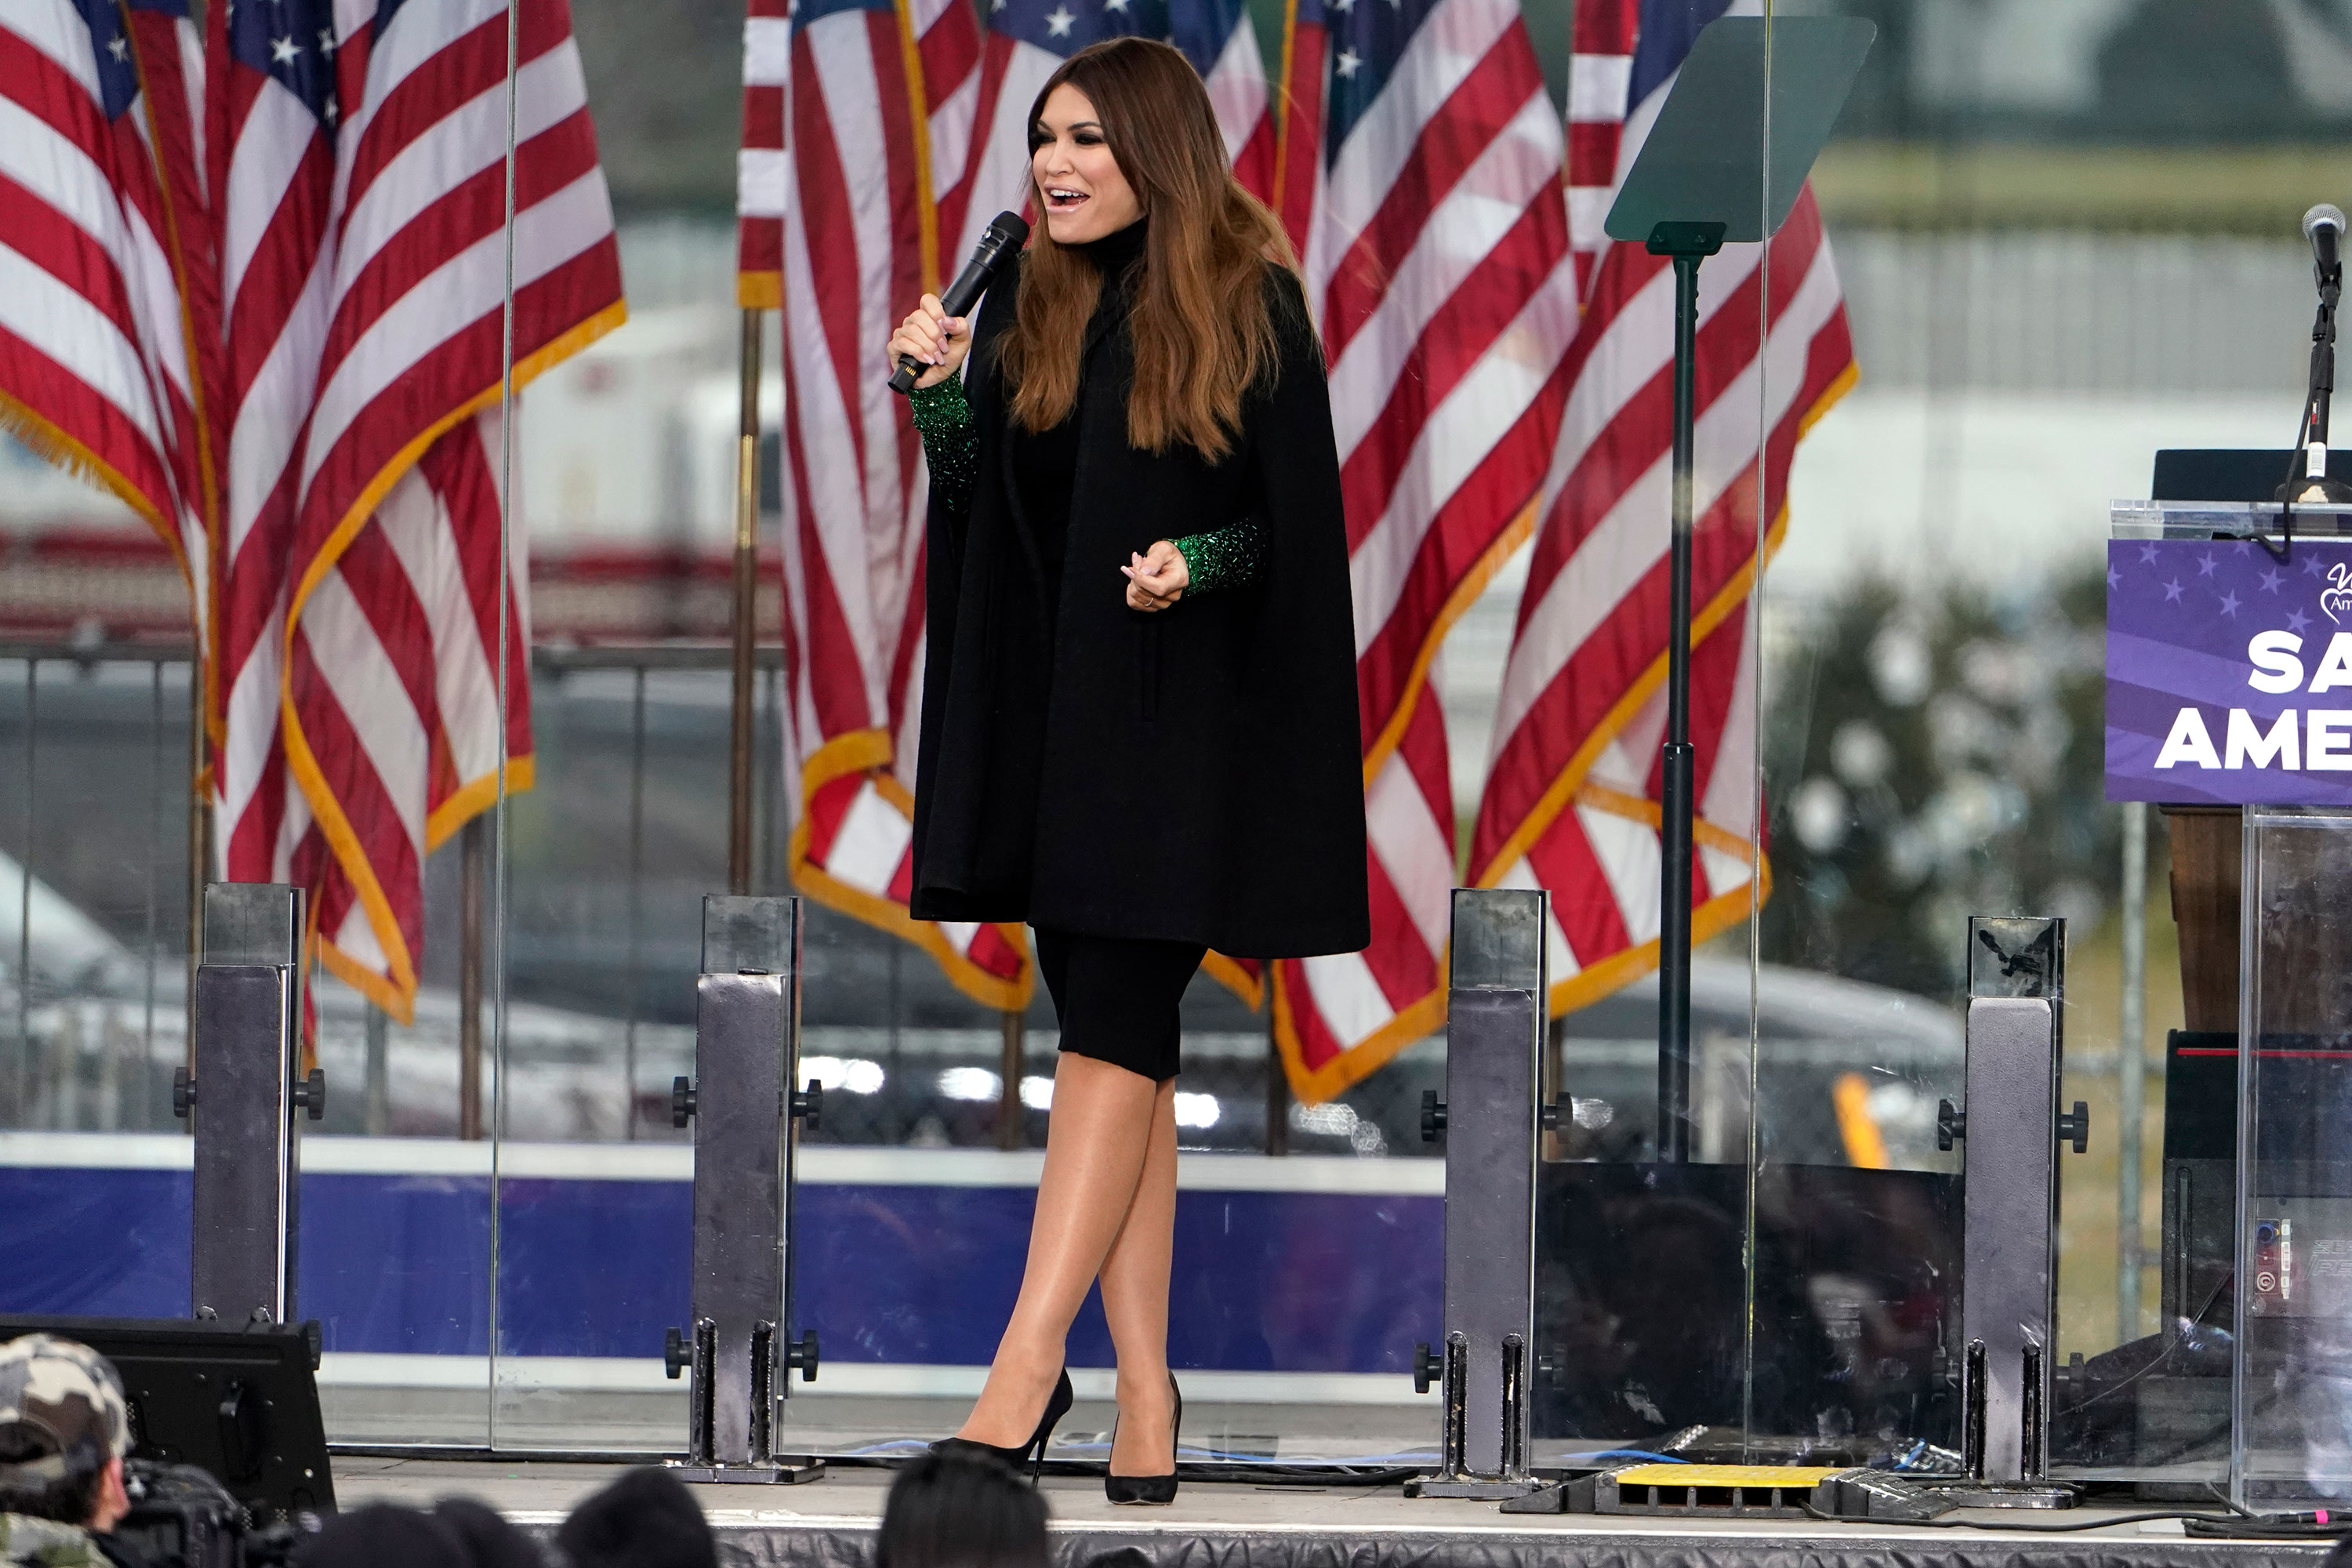 Kimberly Guilfoyle speaks at the rally held before the Capitol riot on January 6, 2021.